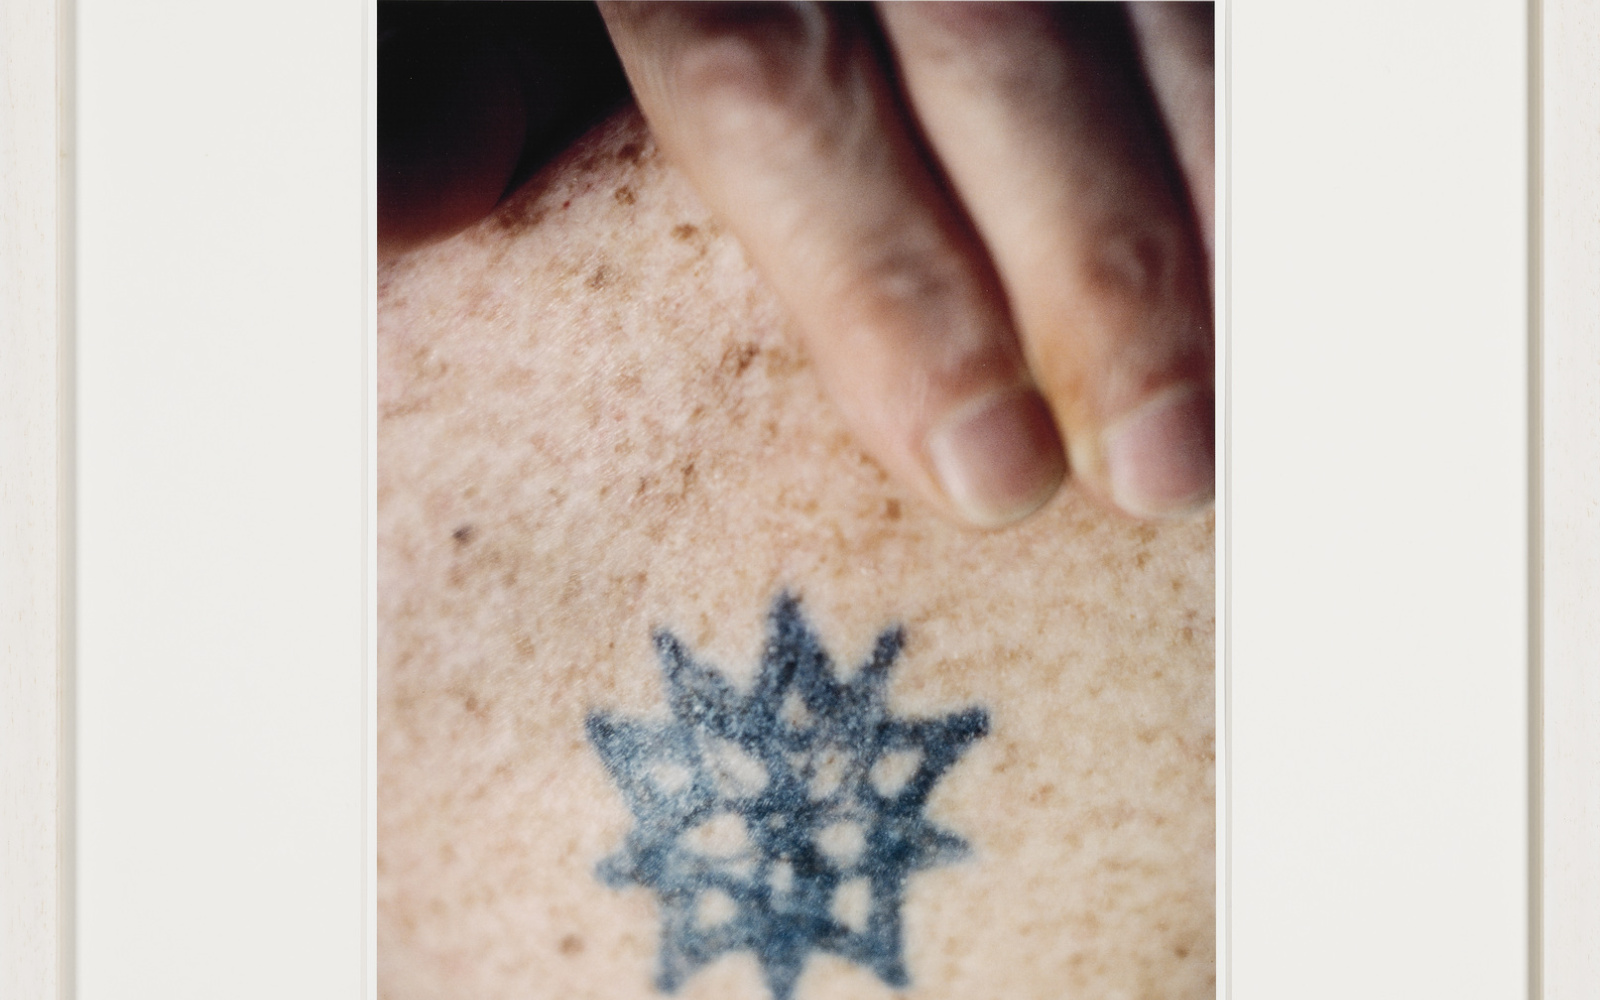 Brion’s Moroccan tattoo on his left shoulder as exposed one sunny morning while visiting at 6 Meisengasse, Basel